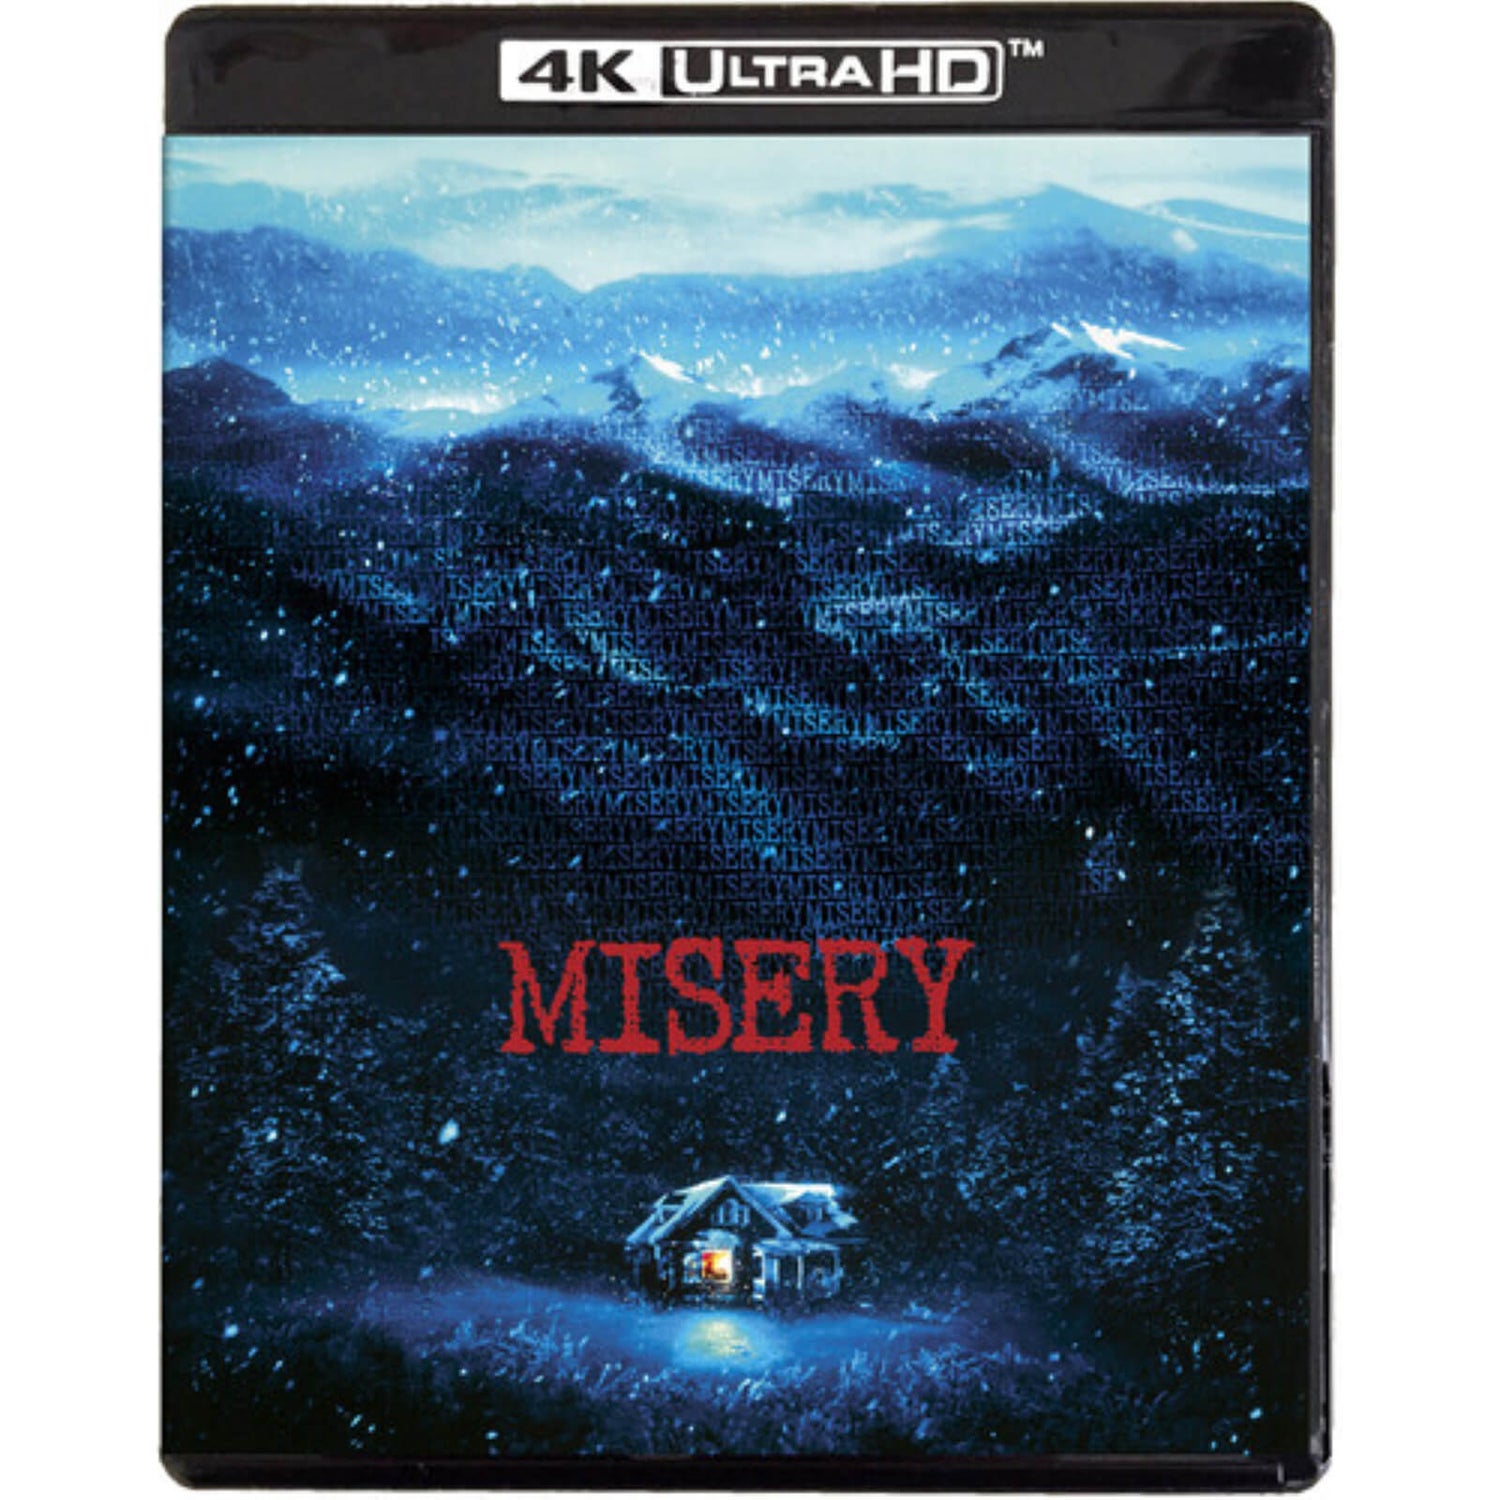 Misery - 4K Ultra HD (Includes Blu-ray) (US Import)